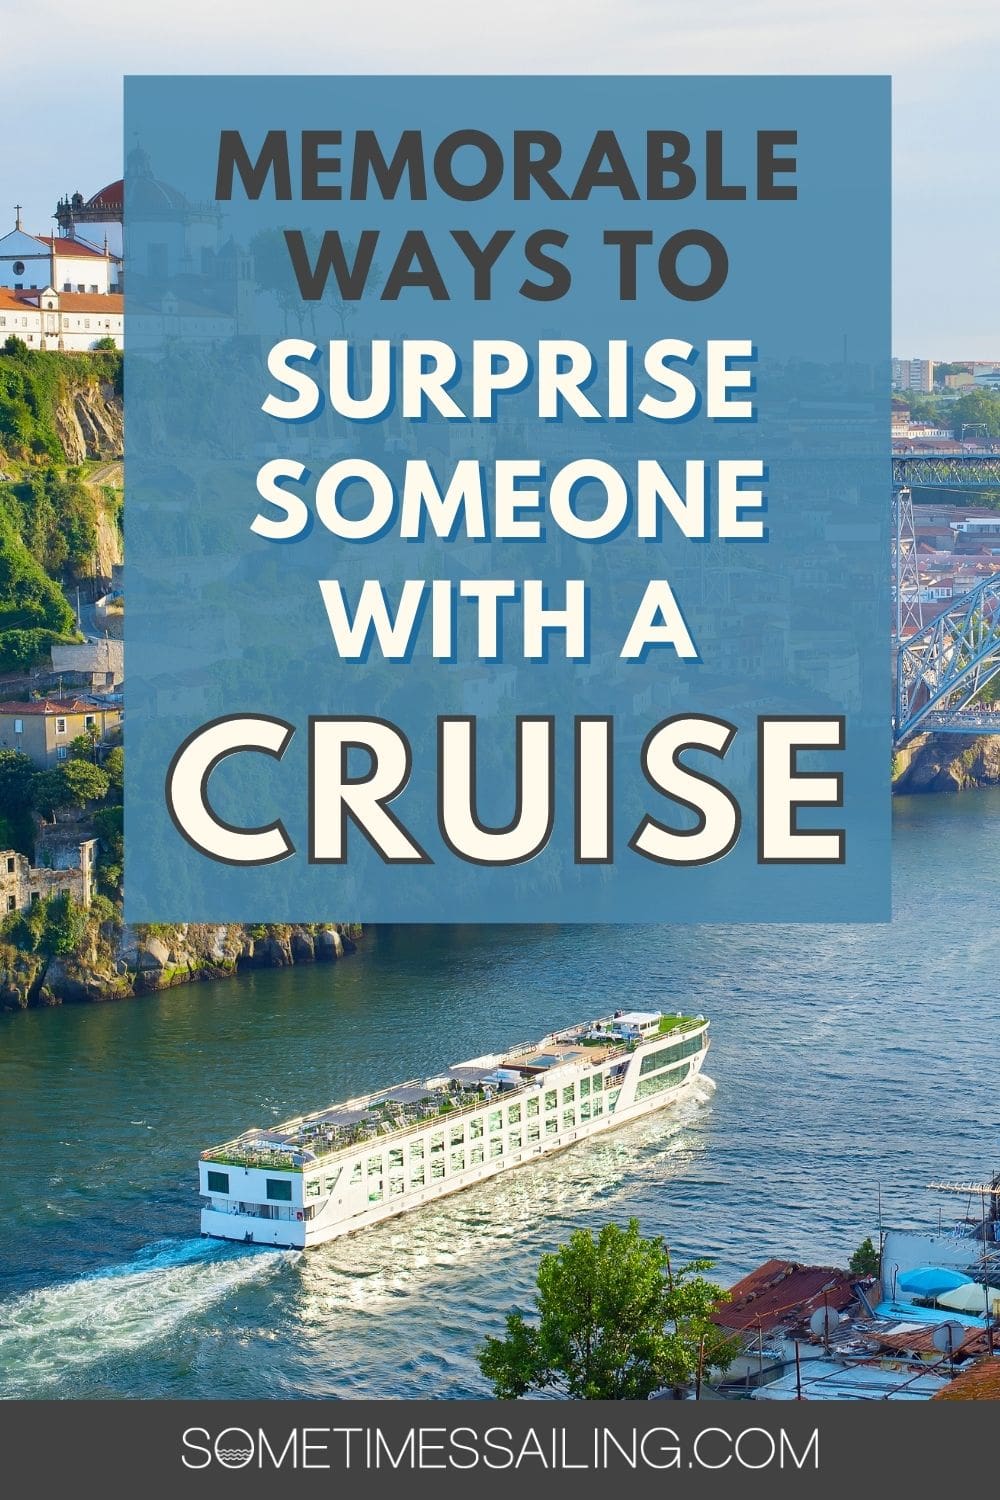 Memorable ways to surprise someone with a cruise, with a photo of a riverboat in the water.